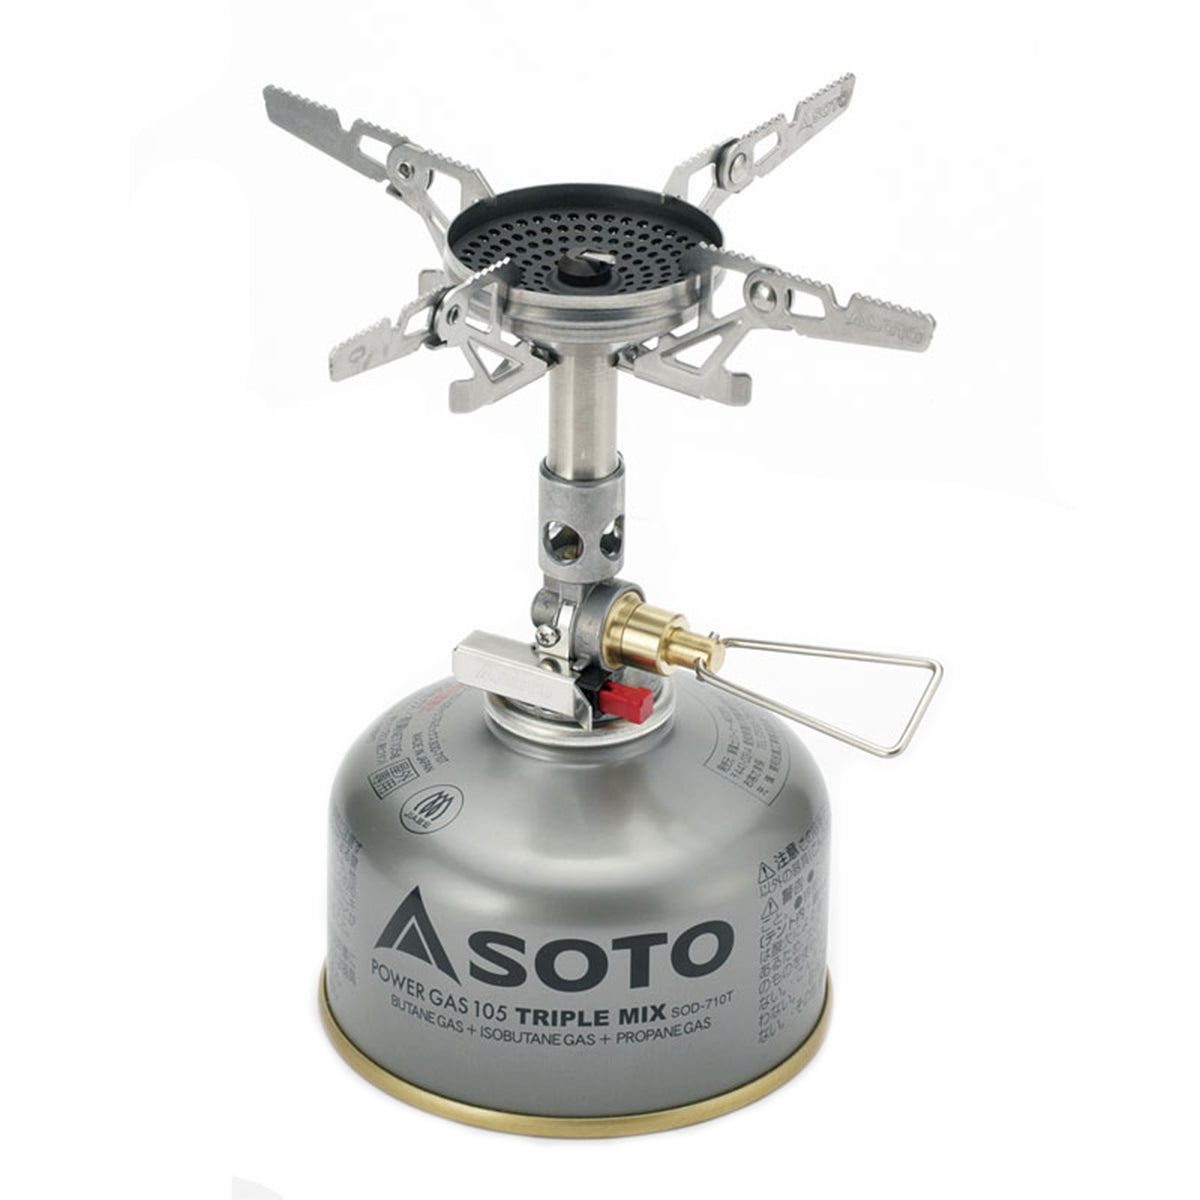 Soto WindMaster with Micro Regulator and 4Flex in Soto WindMaster with Micro Regulator and 4Flex by Soto | Camping - goHUNT Shop by GOHUNT | Soto - GOHUNT Shop